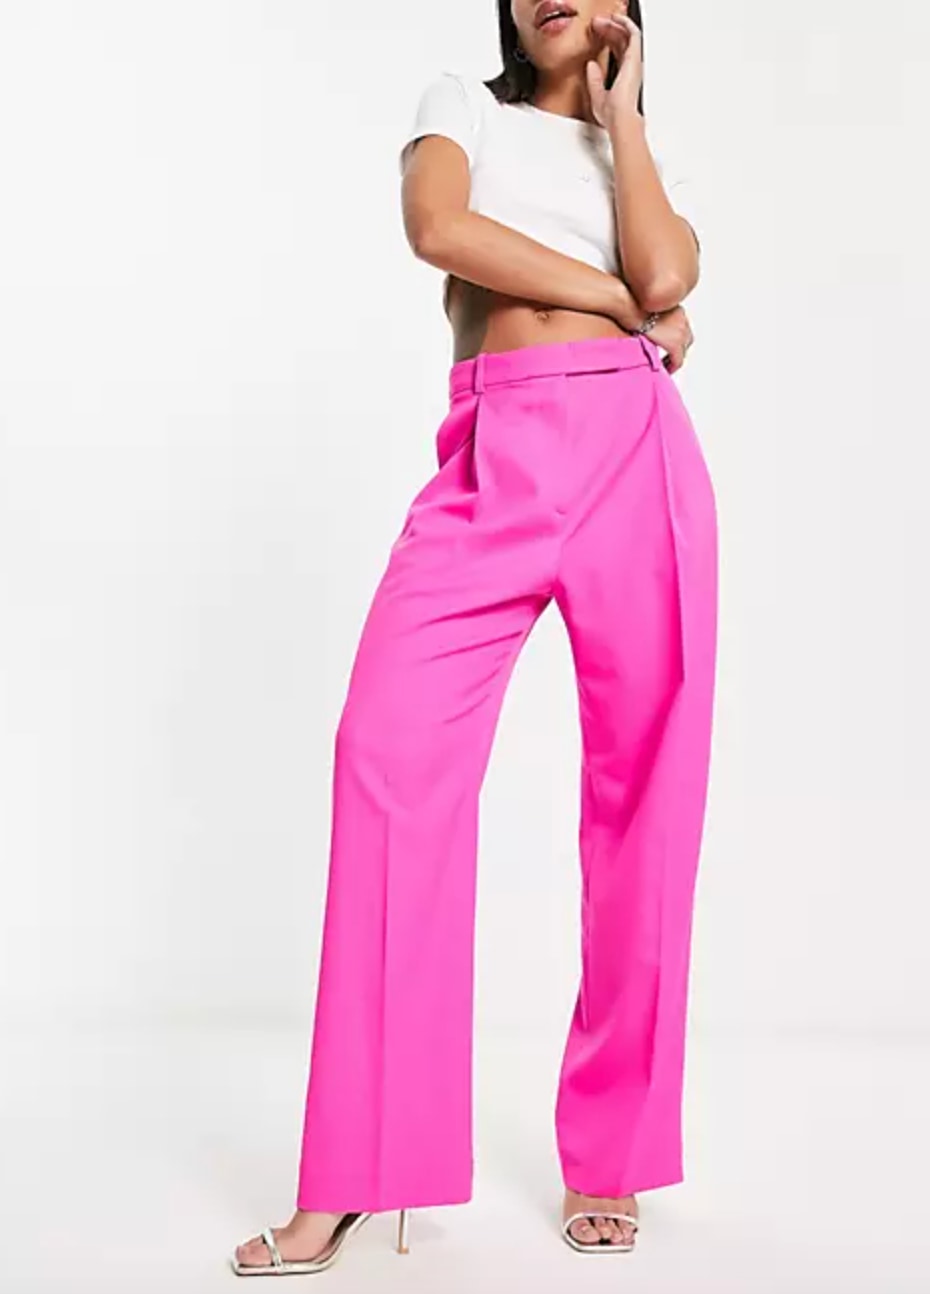 & Other Stories hot pink trousers